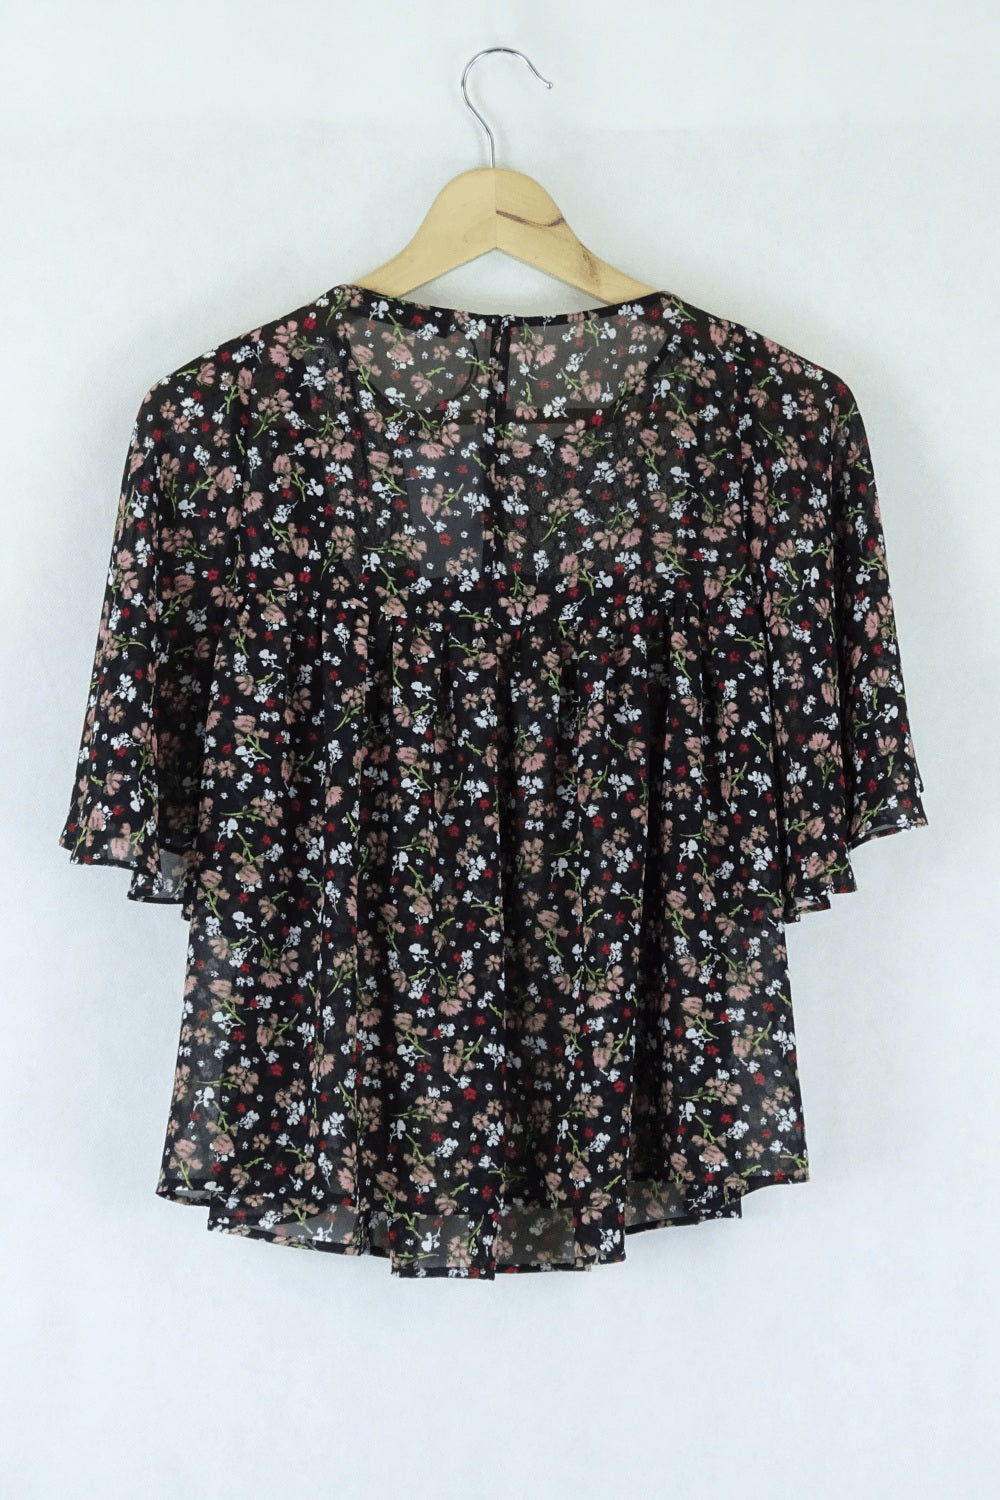 Zara Black and Floral Blouse XS